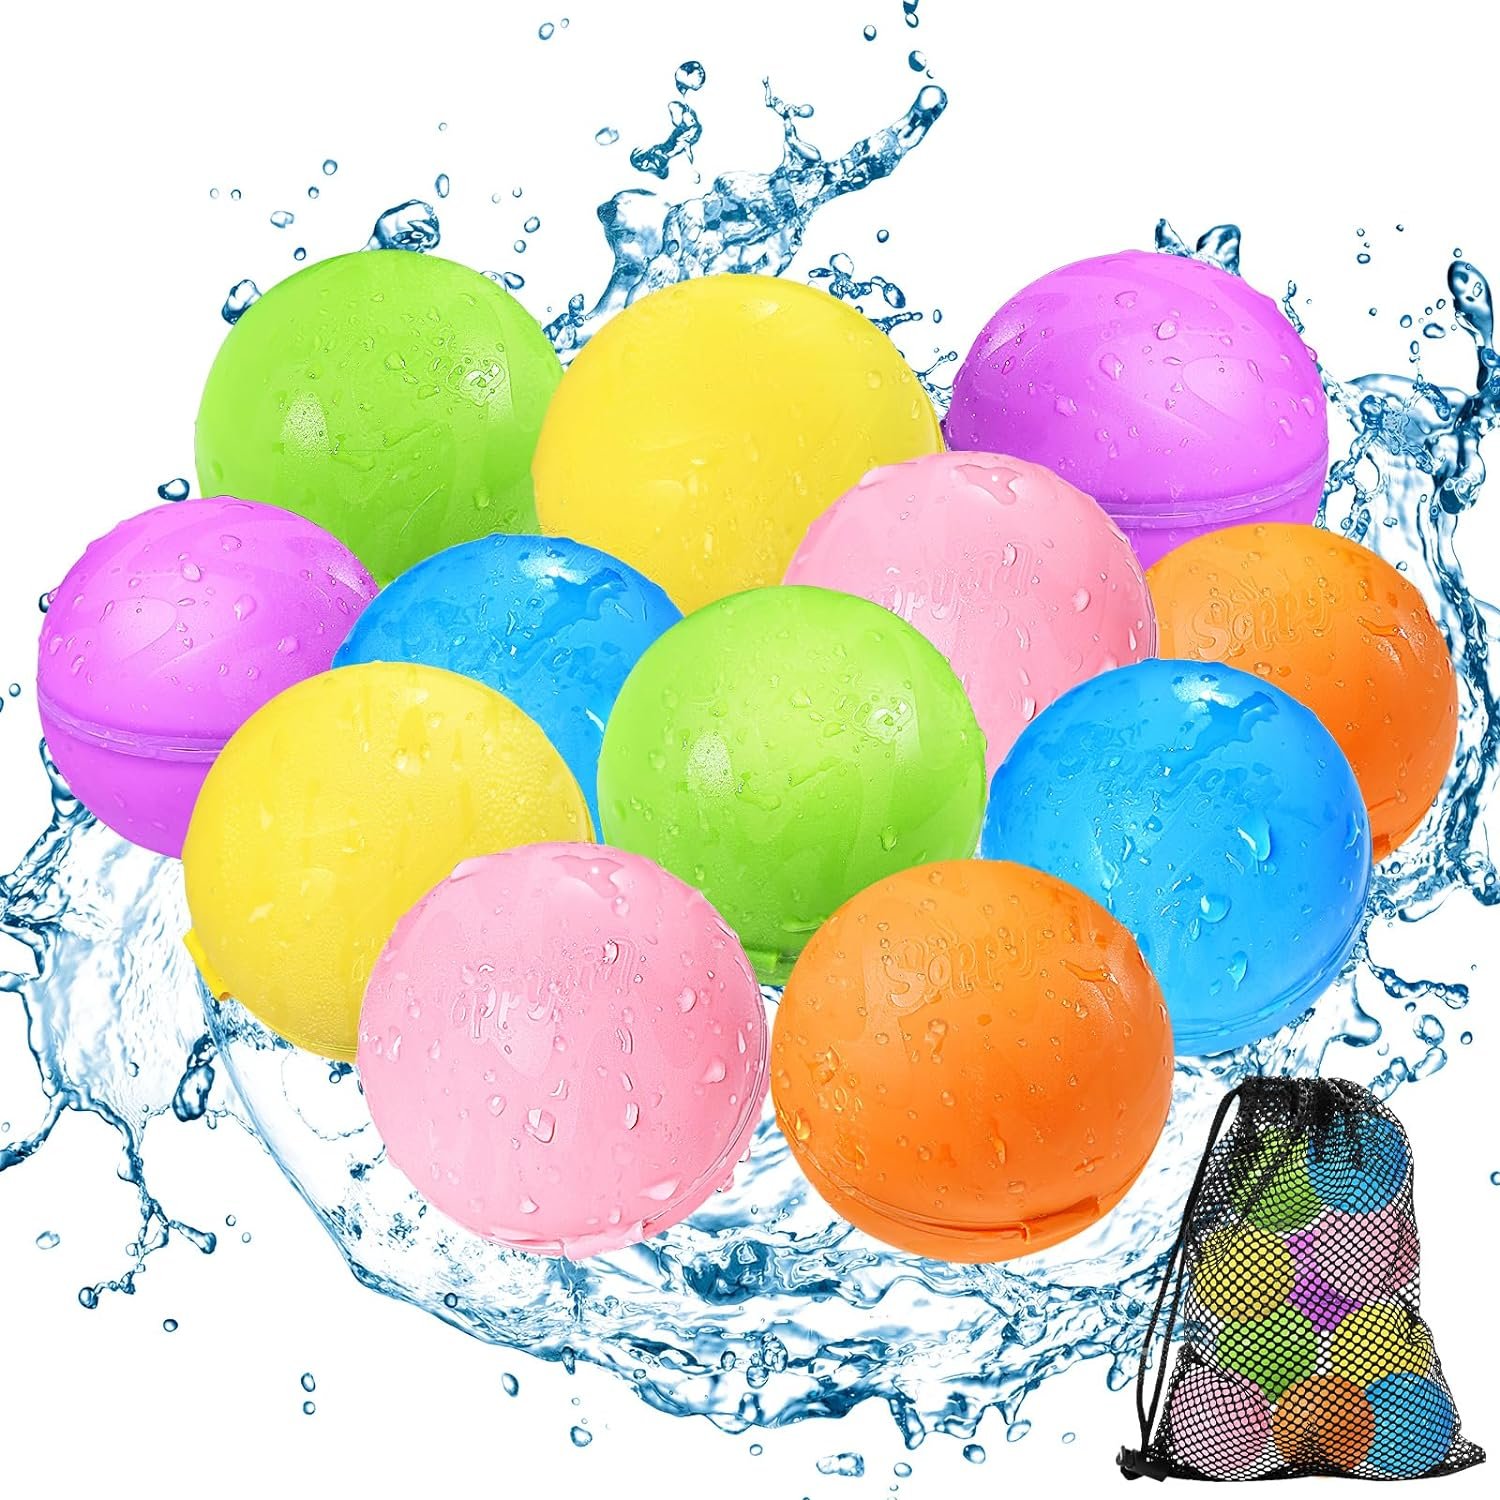 SOPPYCID Reusable Water Bomb balloons, Summer Toy Water Toy for Boys and Girls, Pool Beach Toys for Kids ages 3-12, Outdoor Activities Water Games Toys Self Sealing Water Splash Ball for Fun(12Pack)